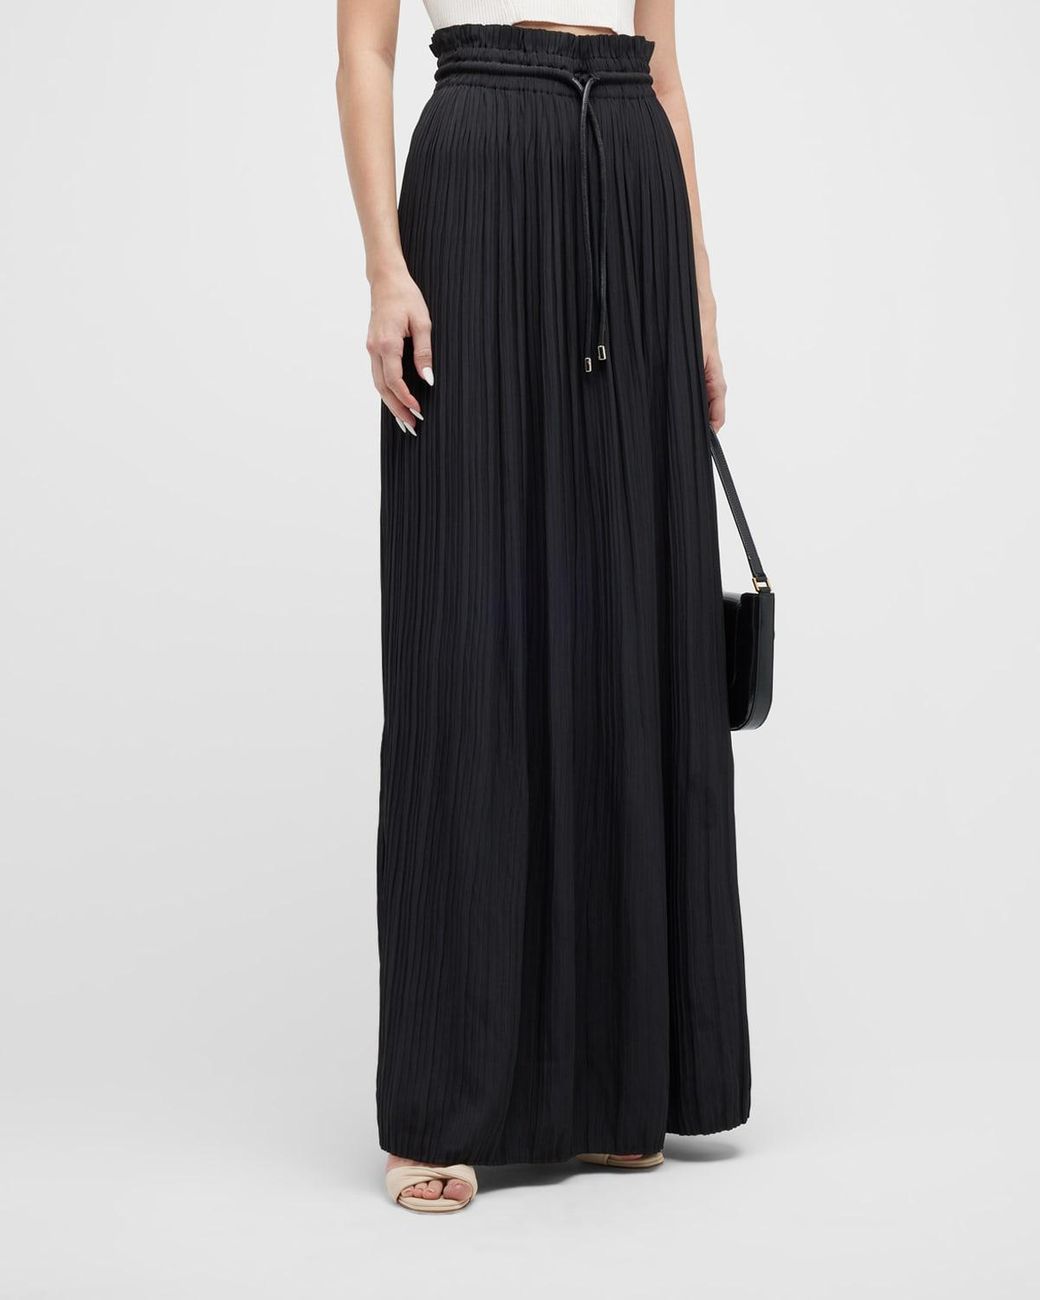 A.L.C. Everly Drawstring Pleated Maxi Skirt in Black | Lyst